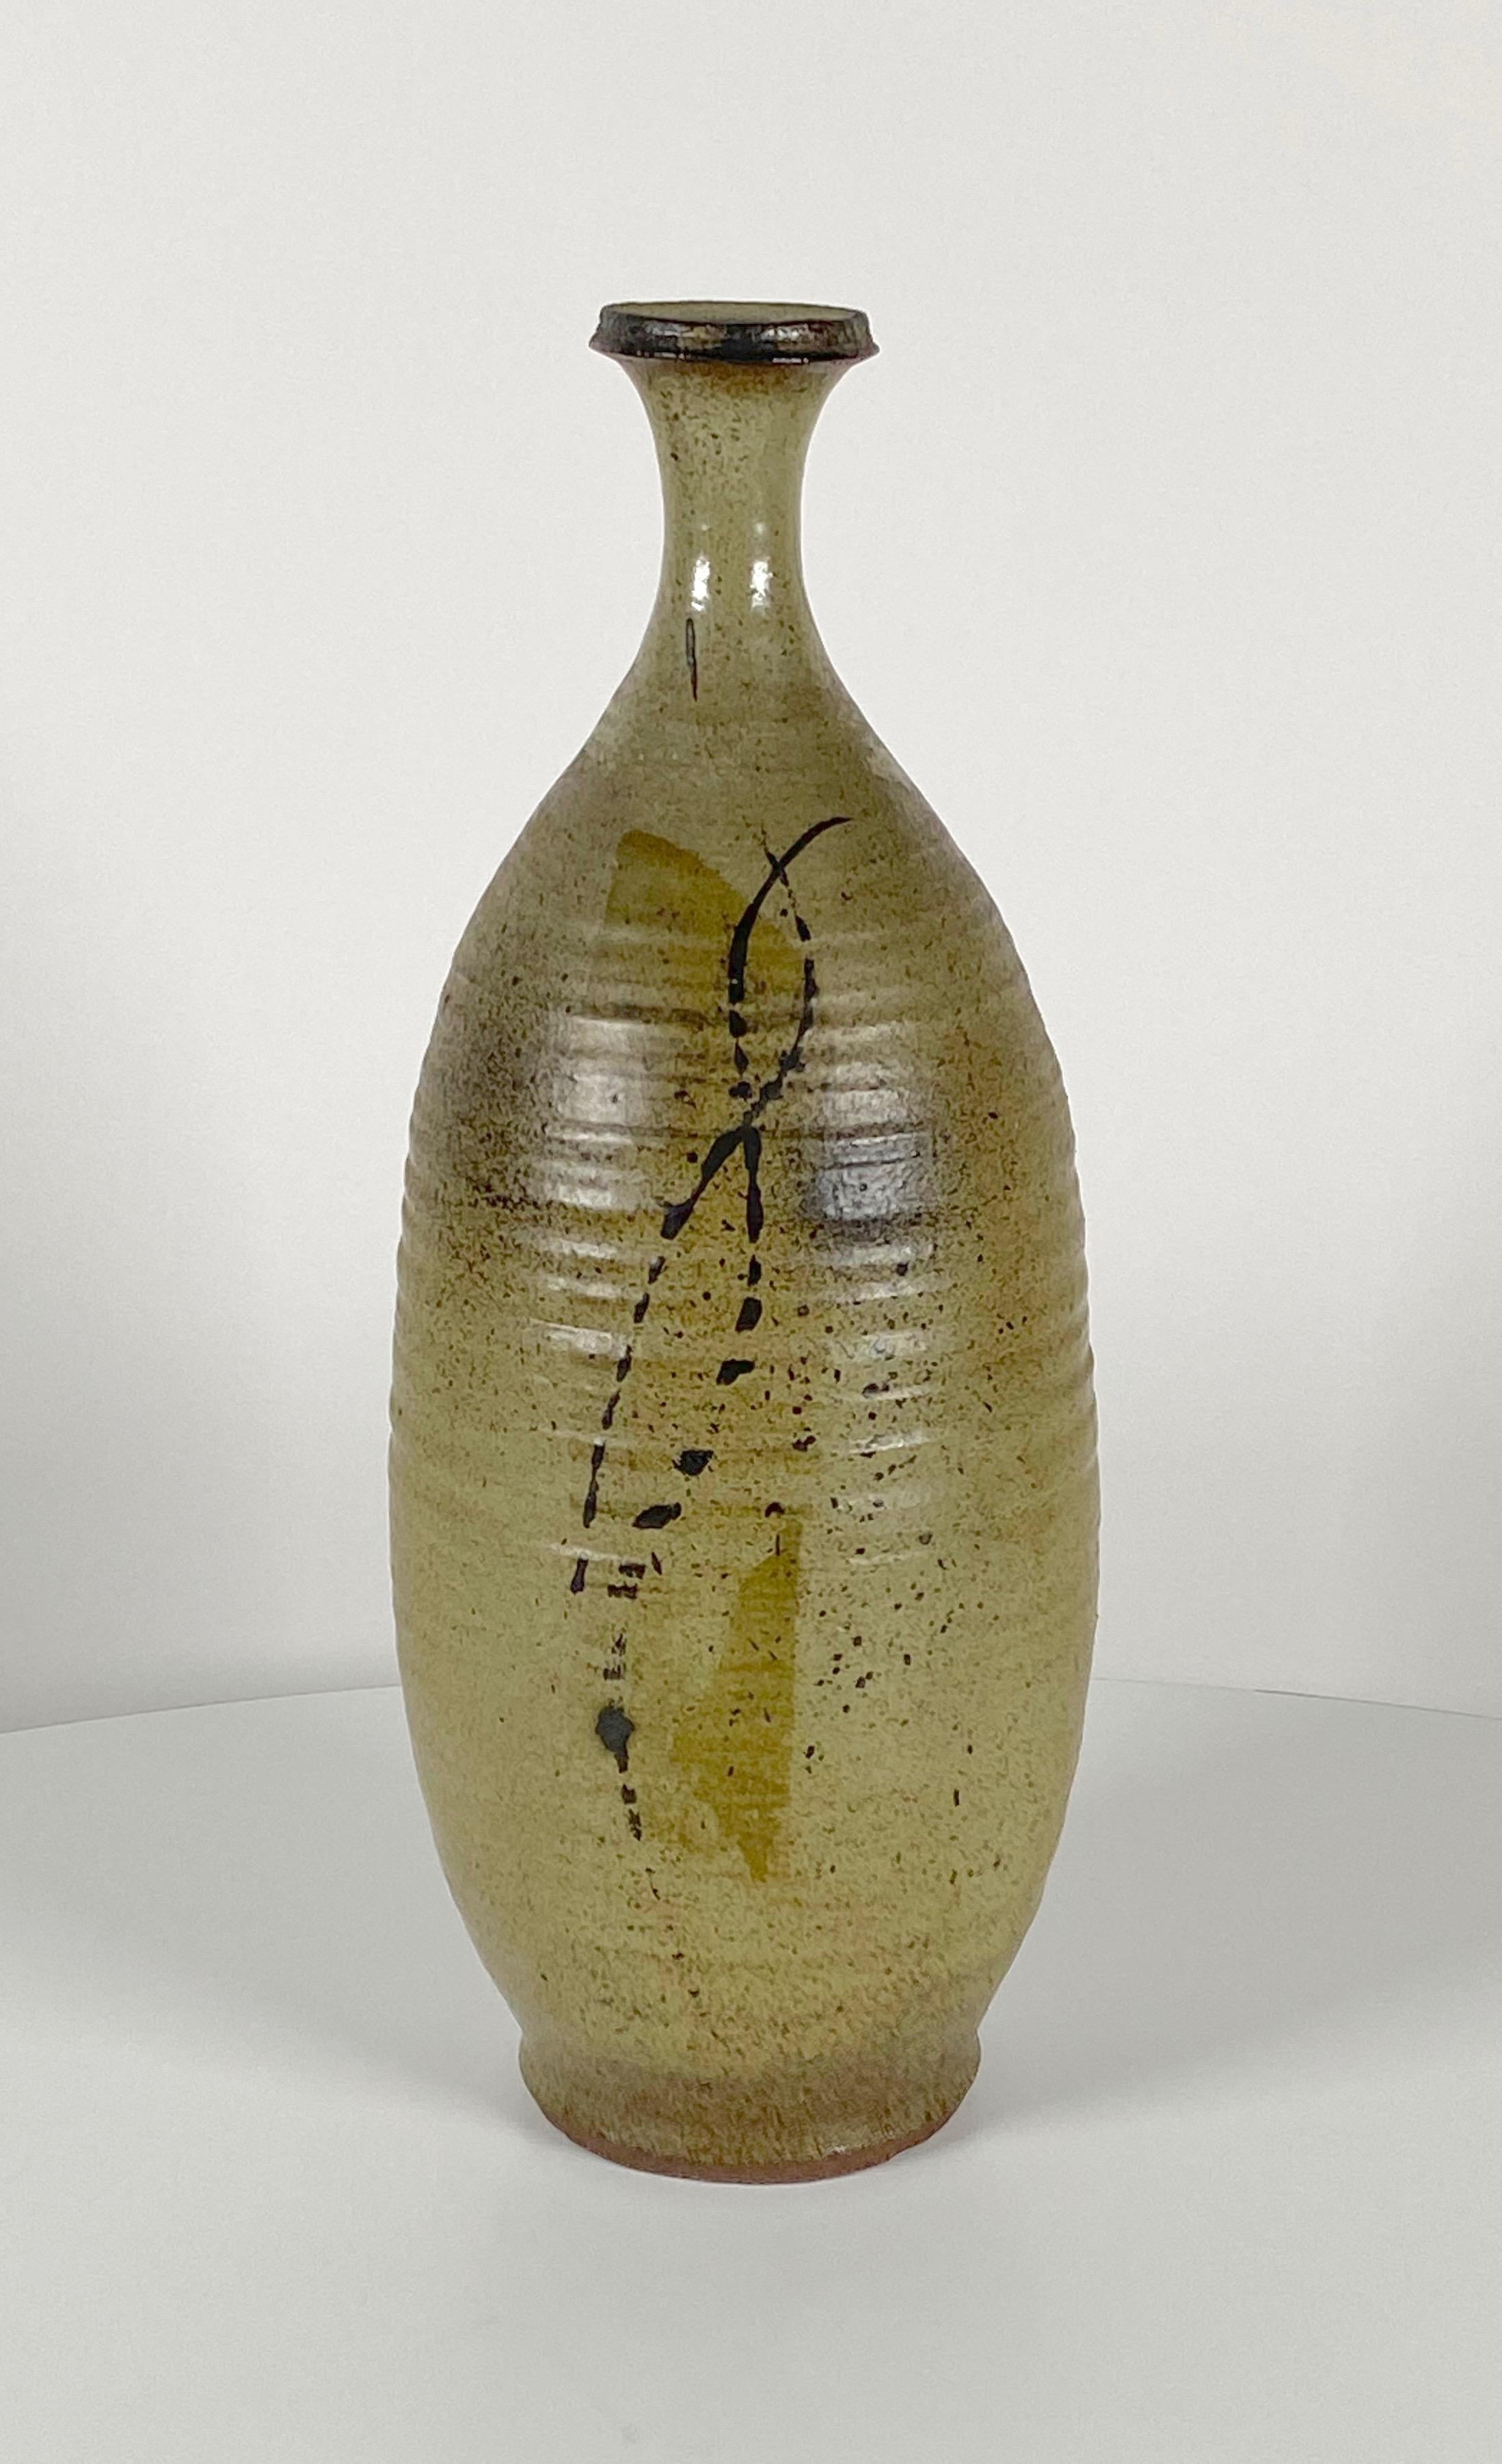 Slender tall ceramic vessel with glaze design embellishment by Bay Area potter Roy Walker (1910-2006). Student of Glen Lukens, his work was influenced by the ceramic artists of Japan. Walker received many awards over his lifetime, had exhibitions at